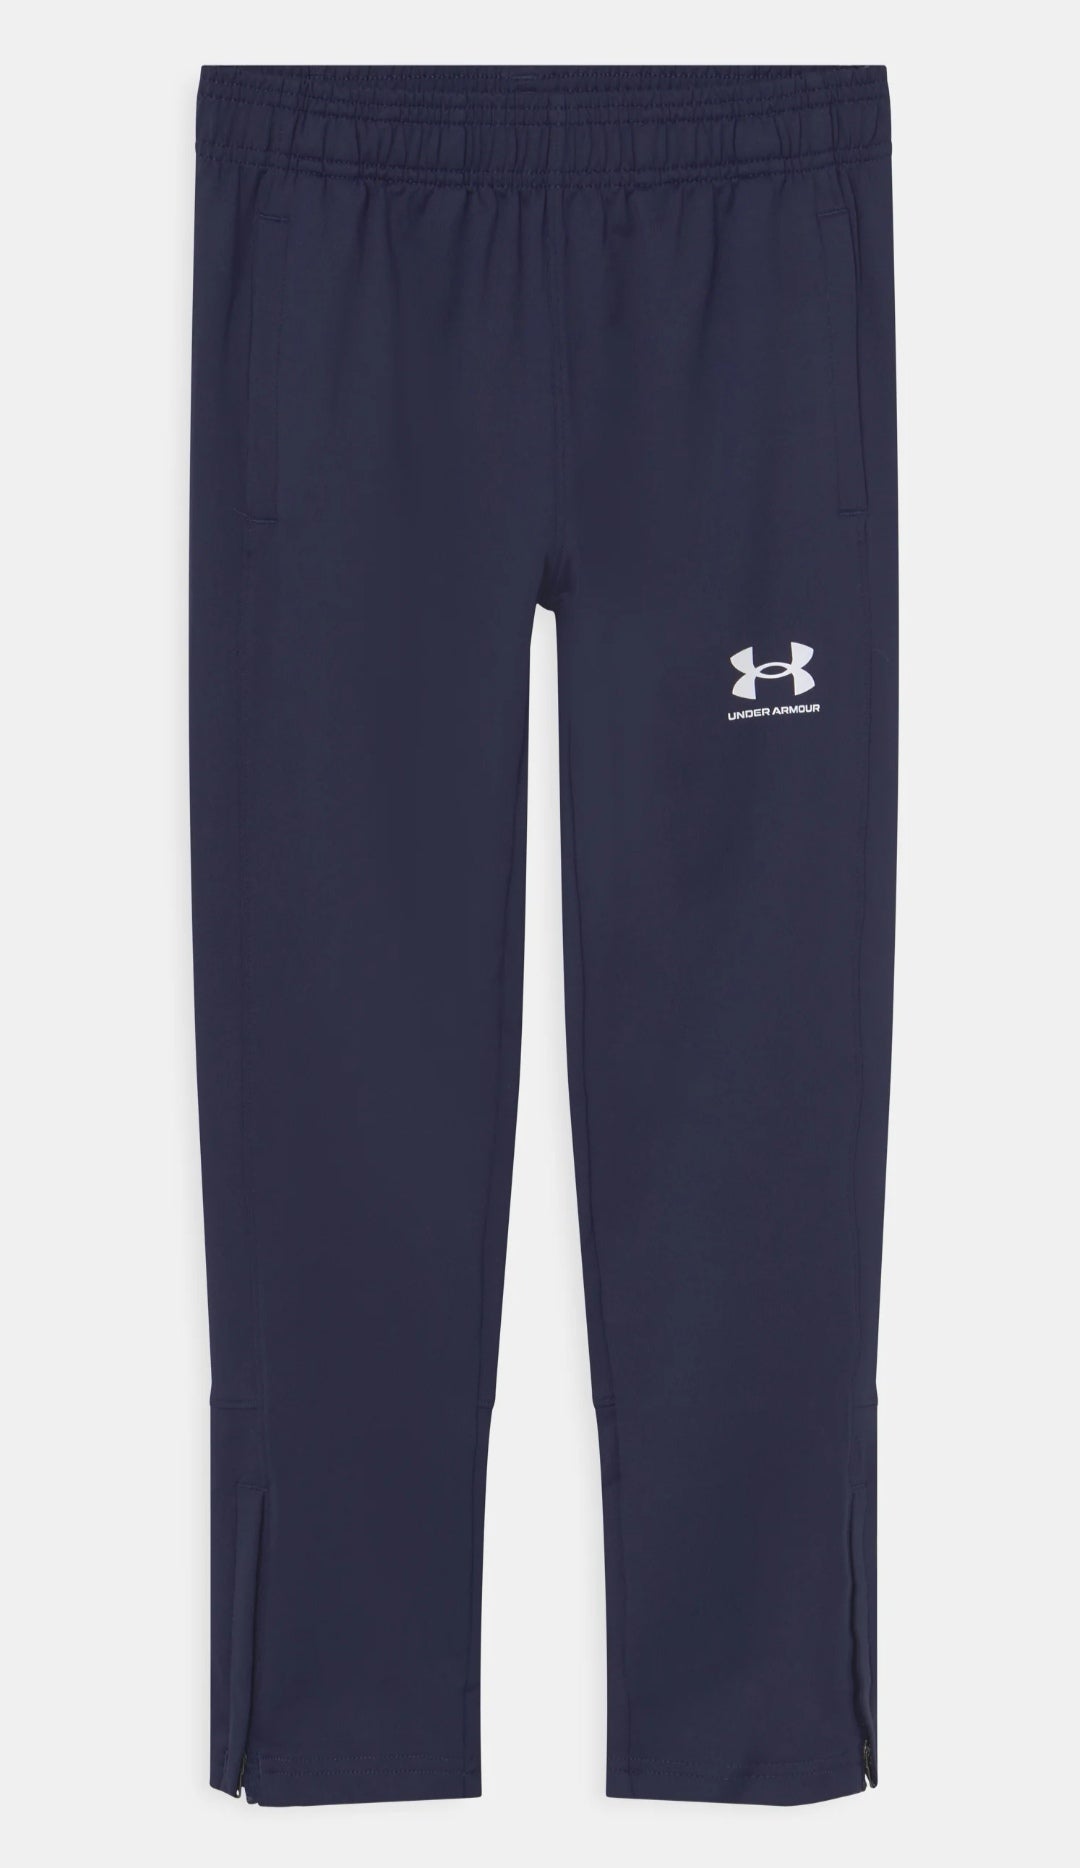 Under Armour CHALLENGER TRAINING PANT